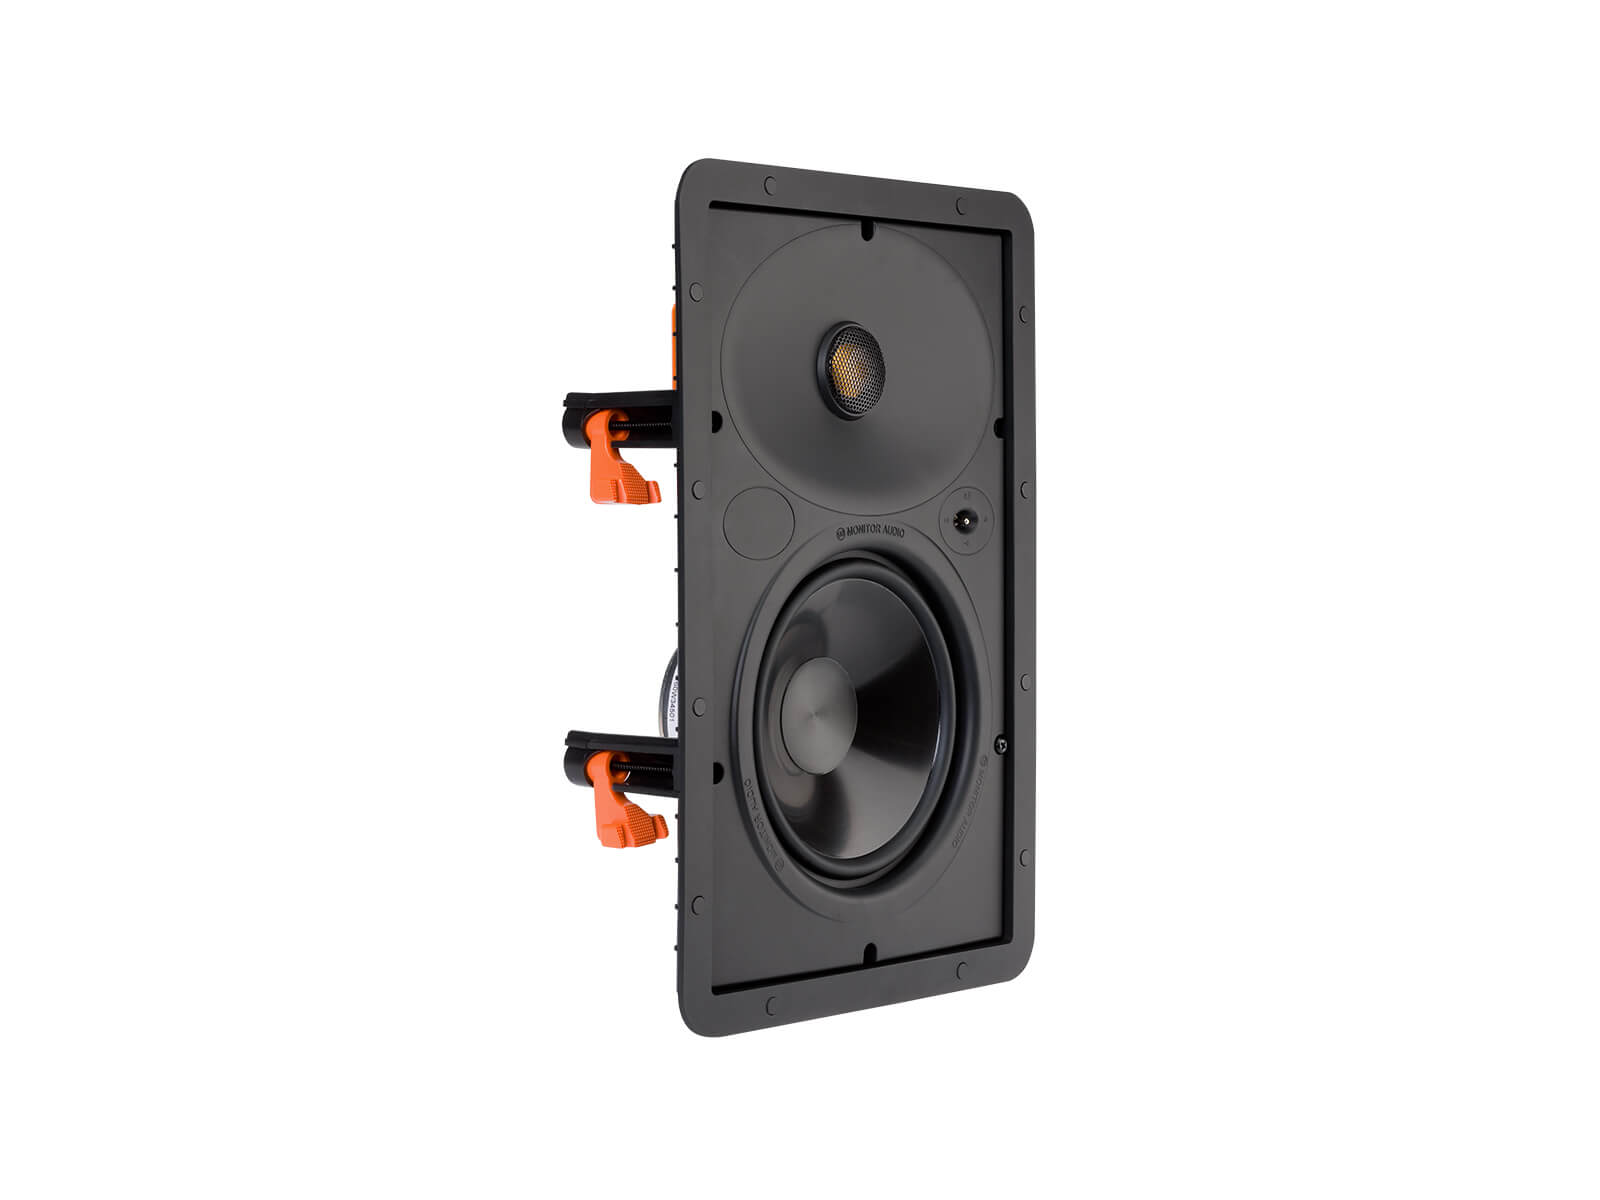 Core W165, front ISO, grille-less in-wall speakers.